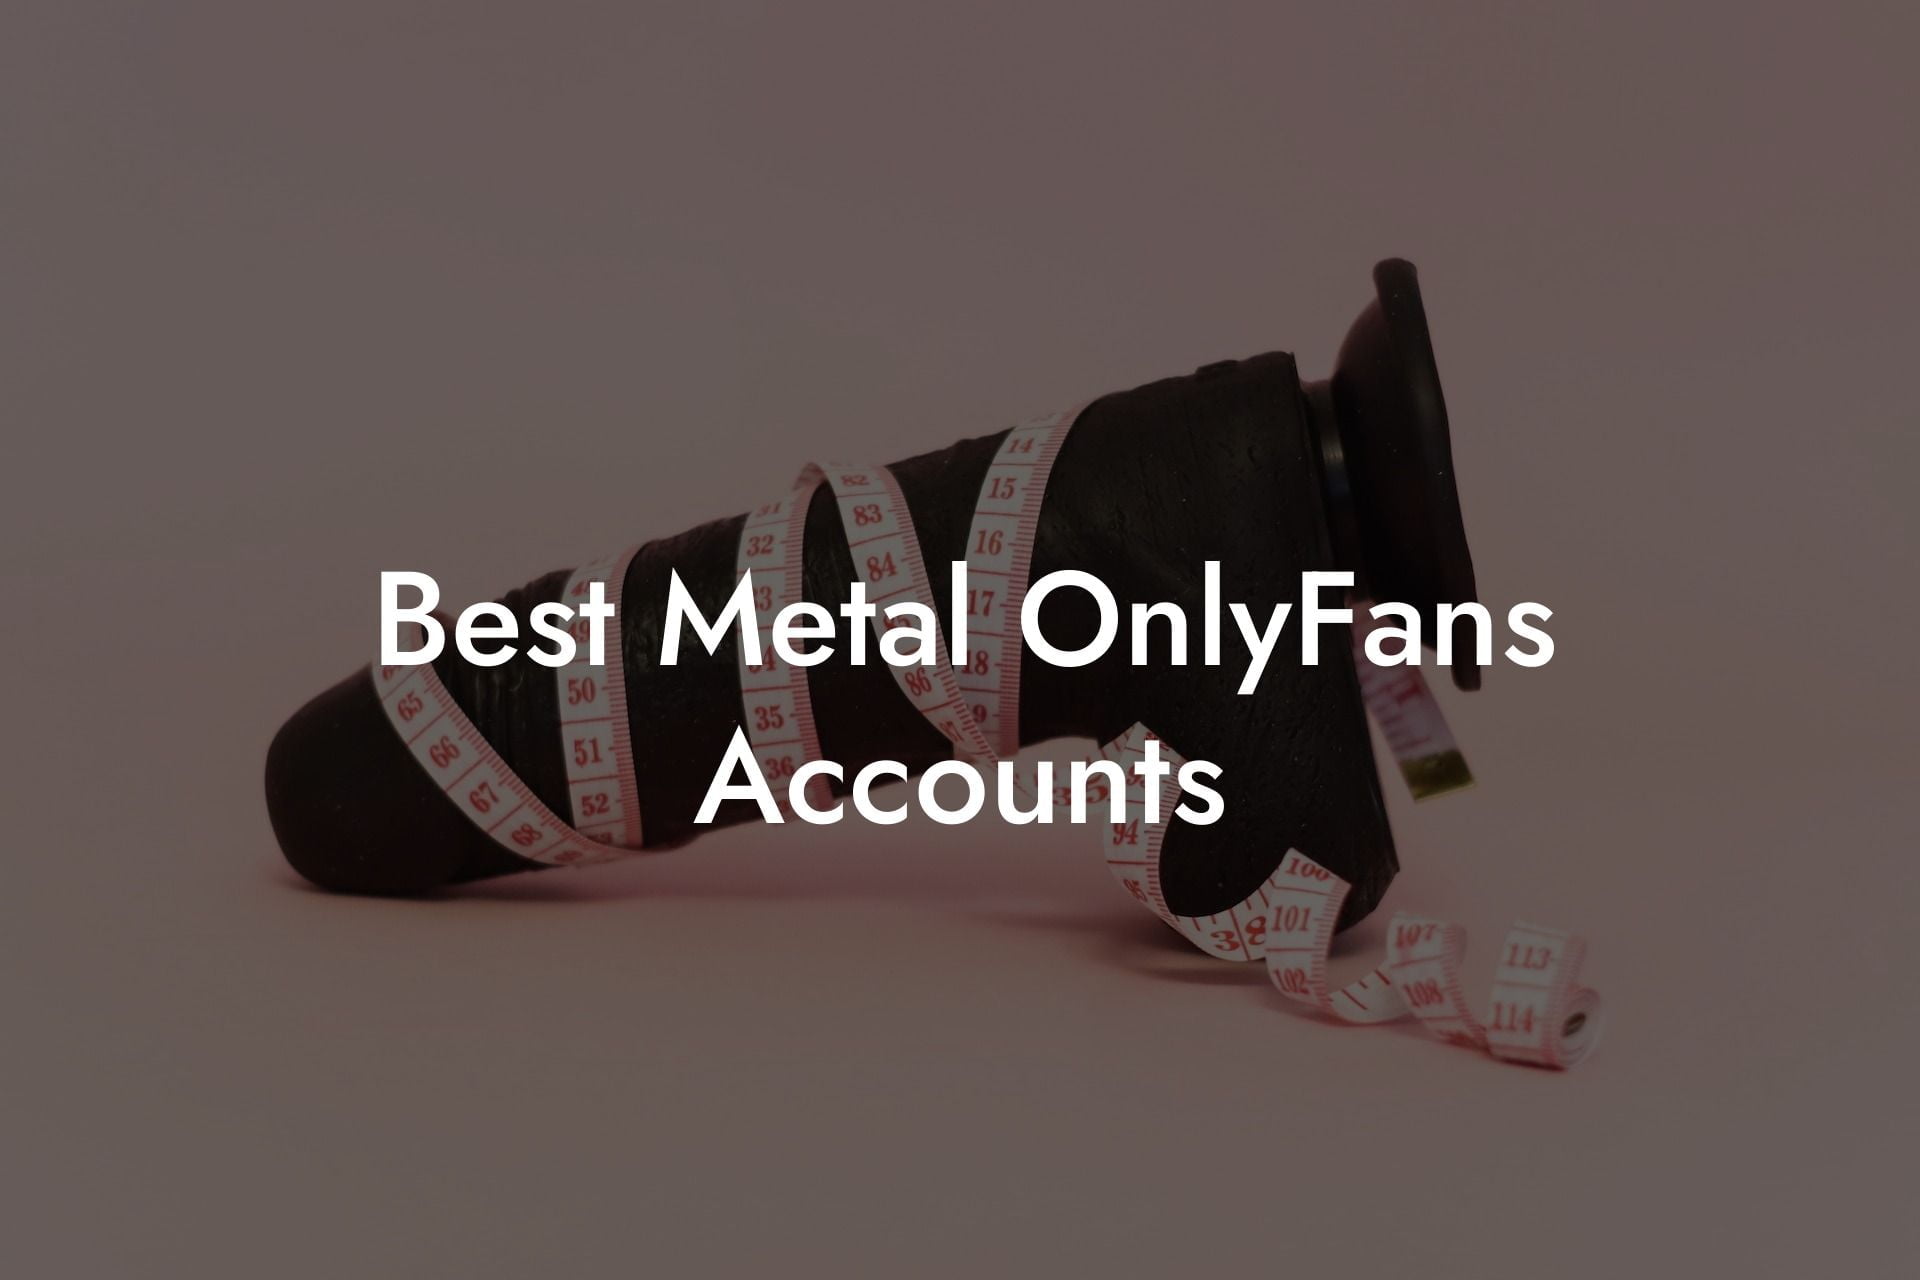 Best Metal OnlyFans Accounts